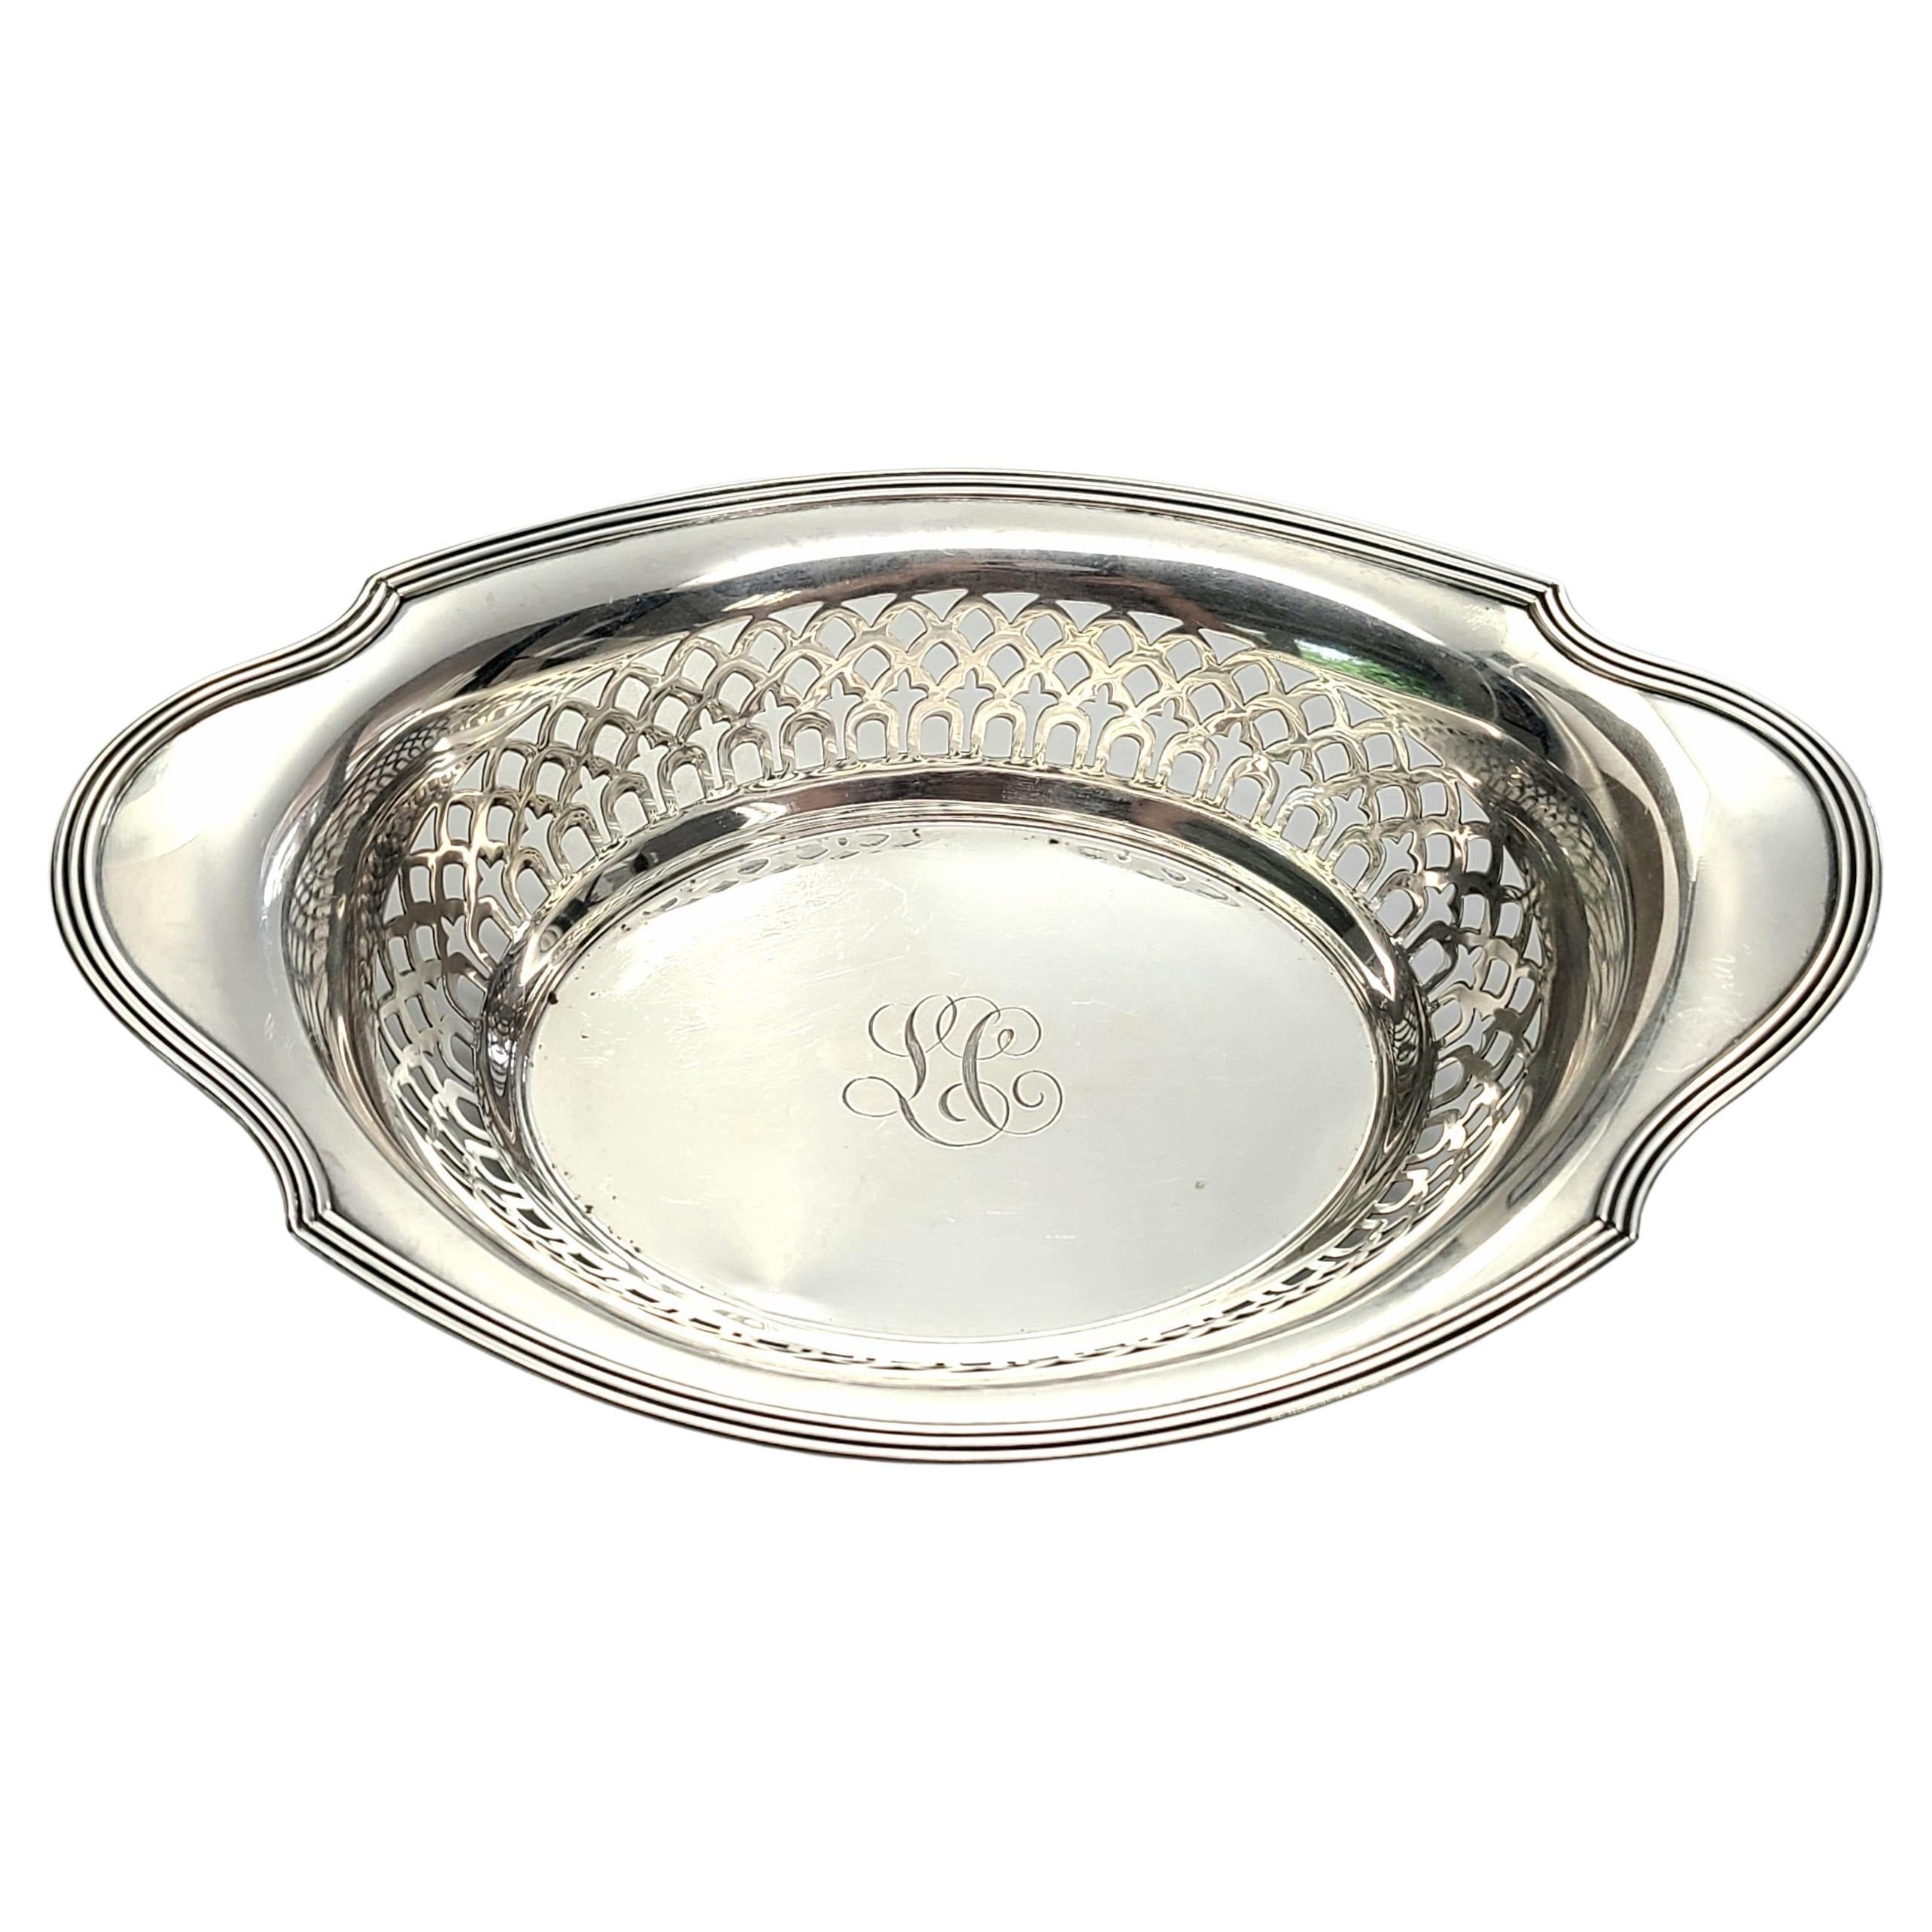 Gorham Sterling Silver Plymouth Open Work Bowl with Monogram